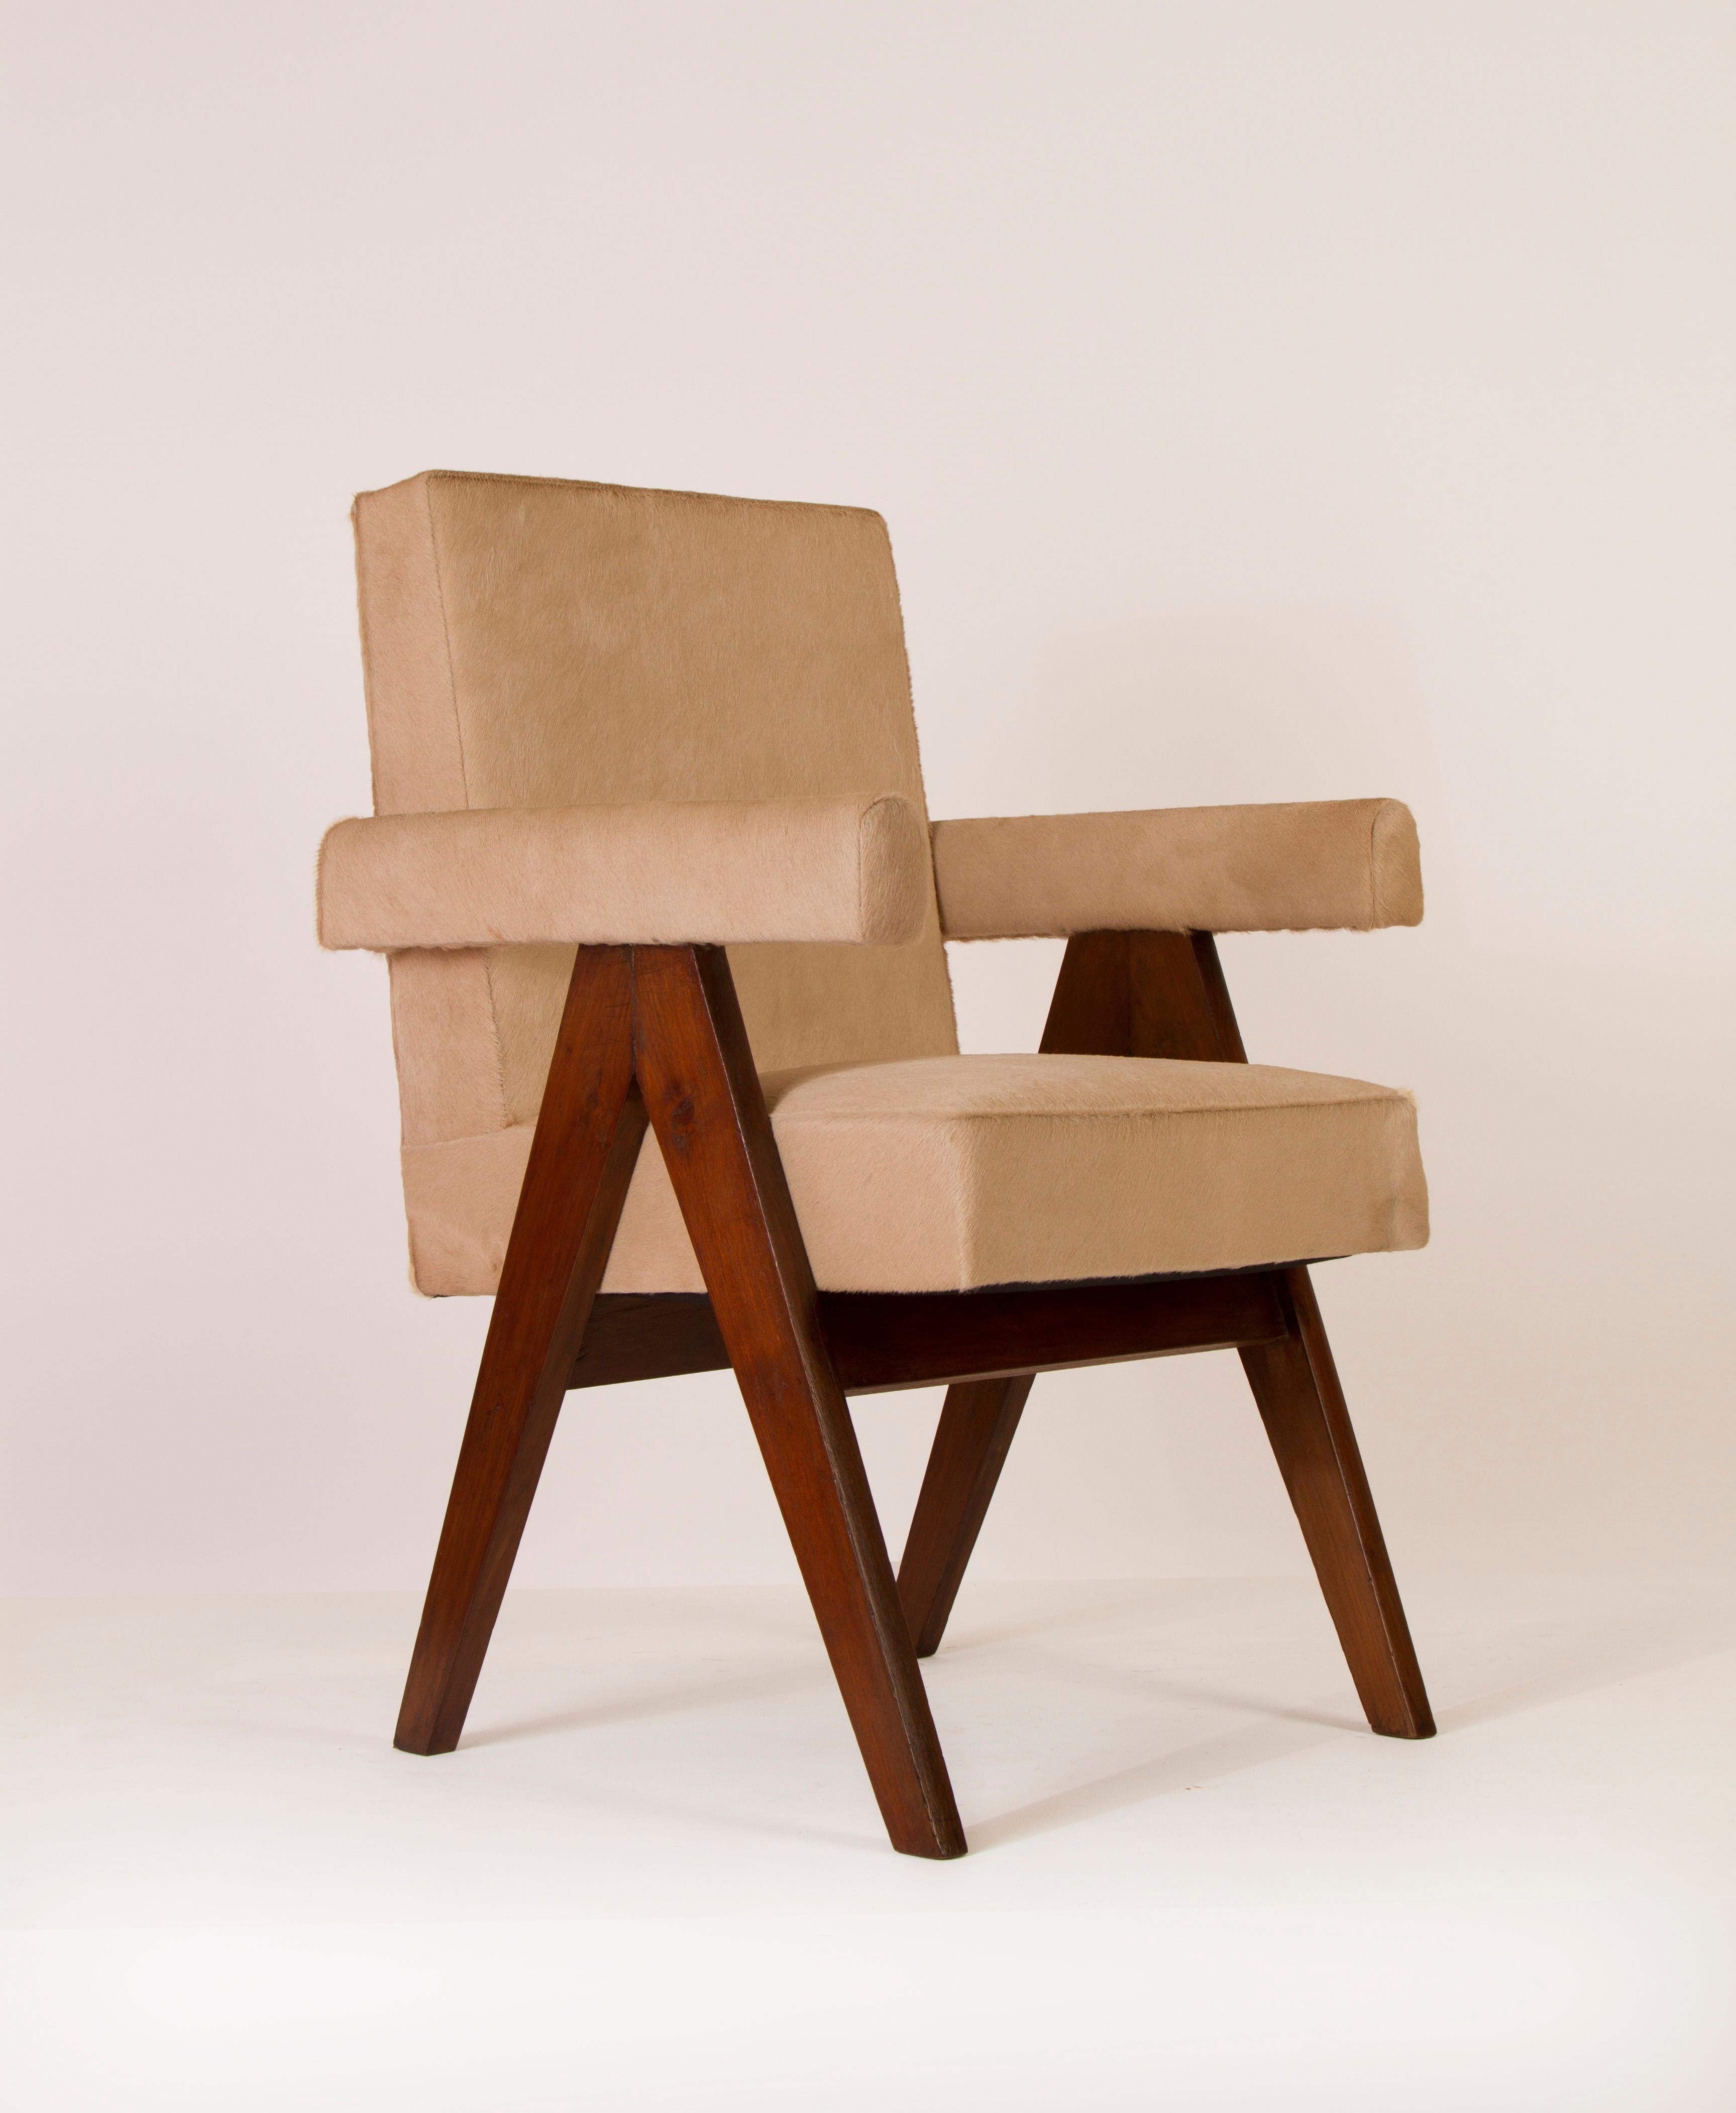 Pierre Jeanneret pair of Upholstered Commettee armchairs in teak, upholstered in cow skin.
Provenance: Assembly, High Court,  Chandigarh, India.